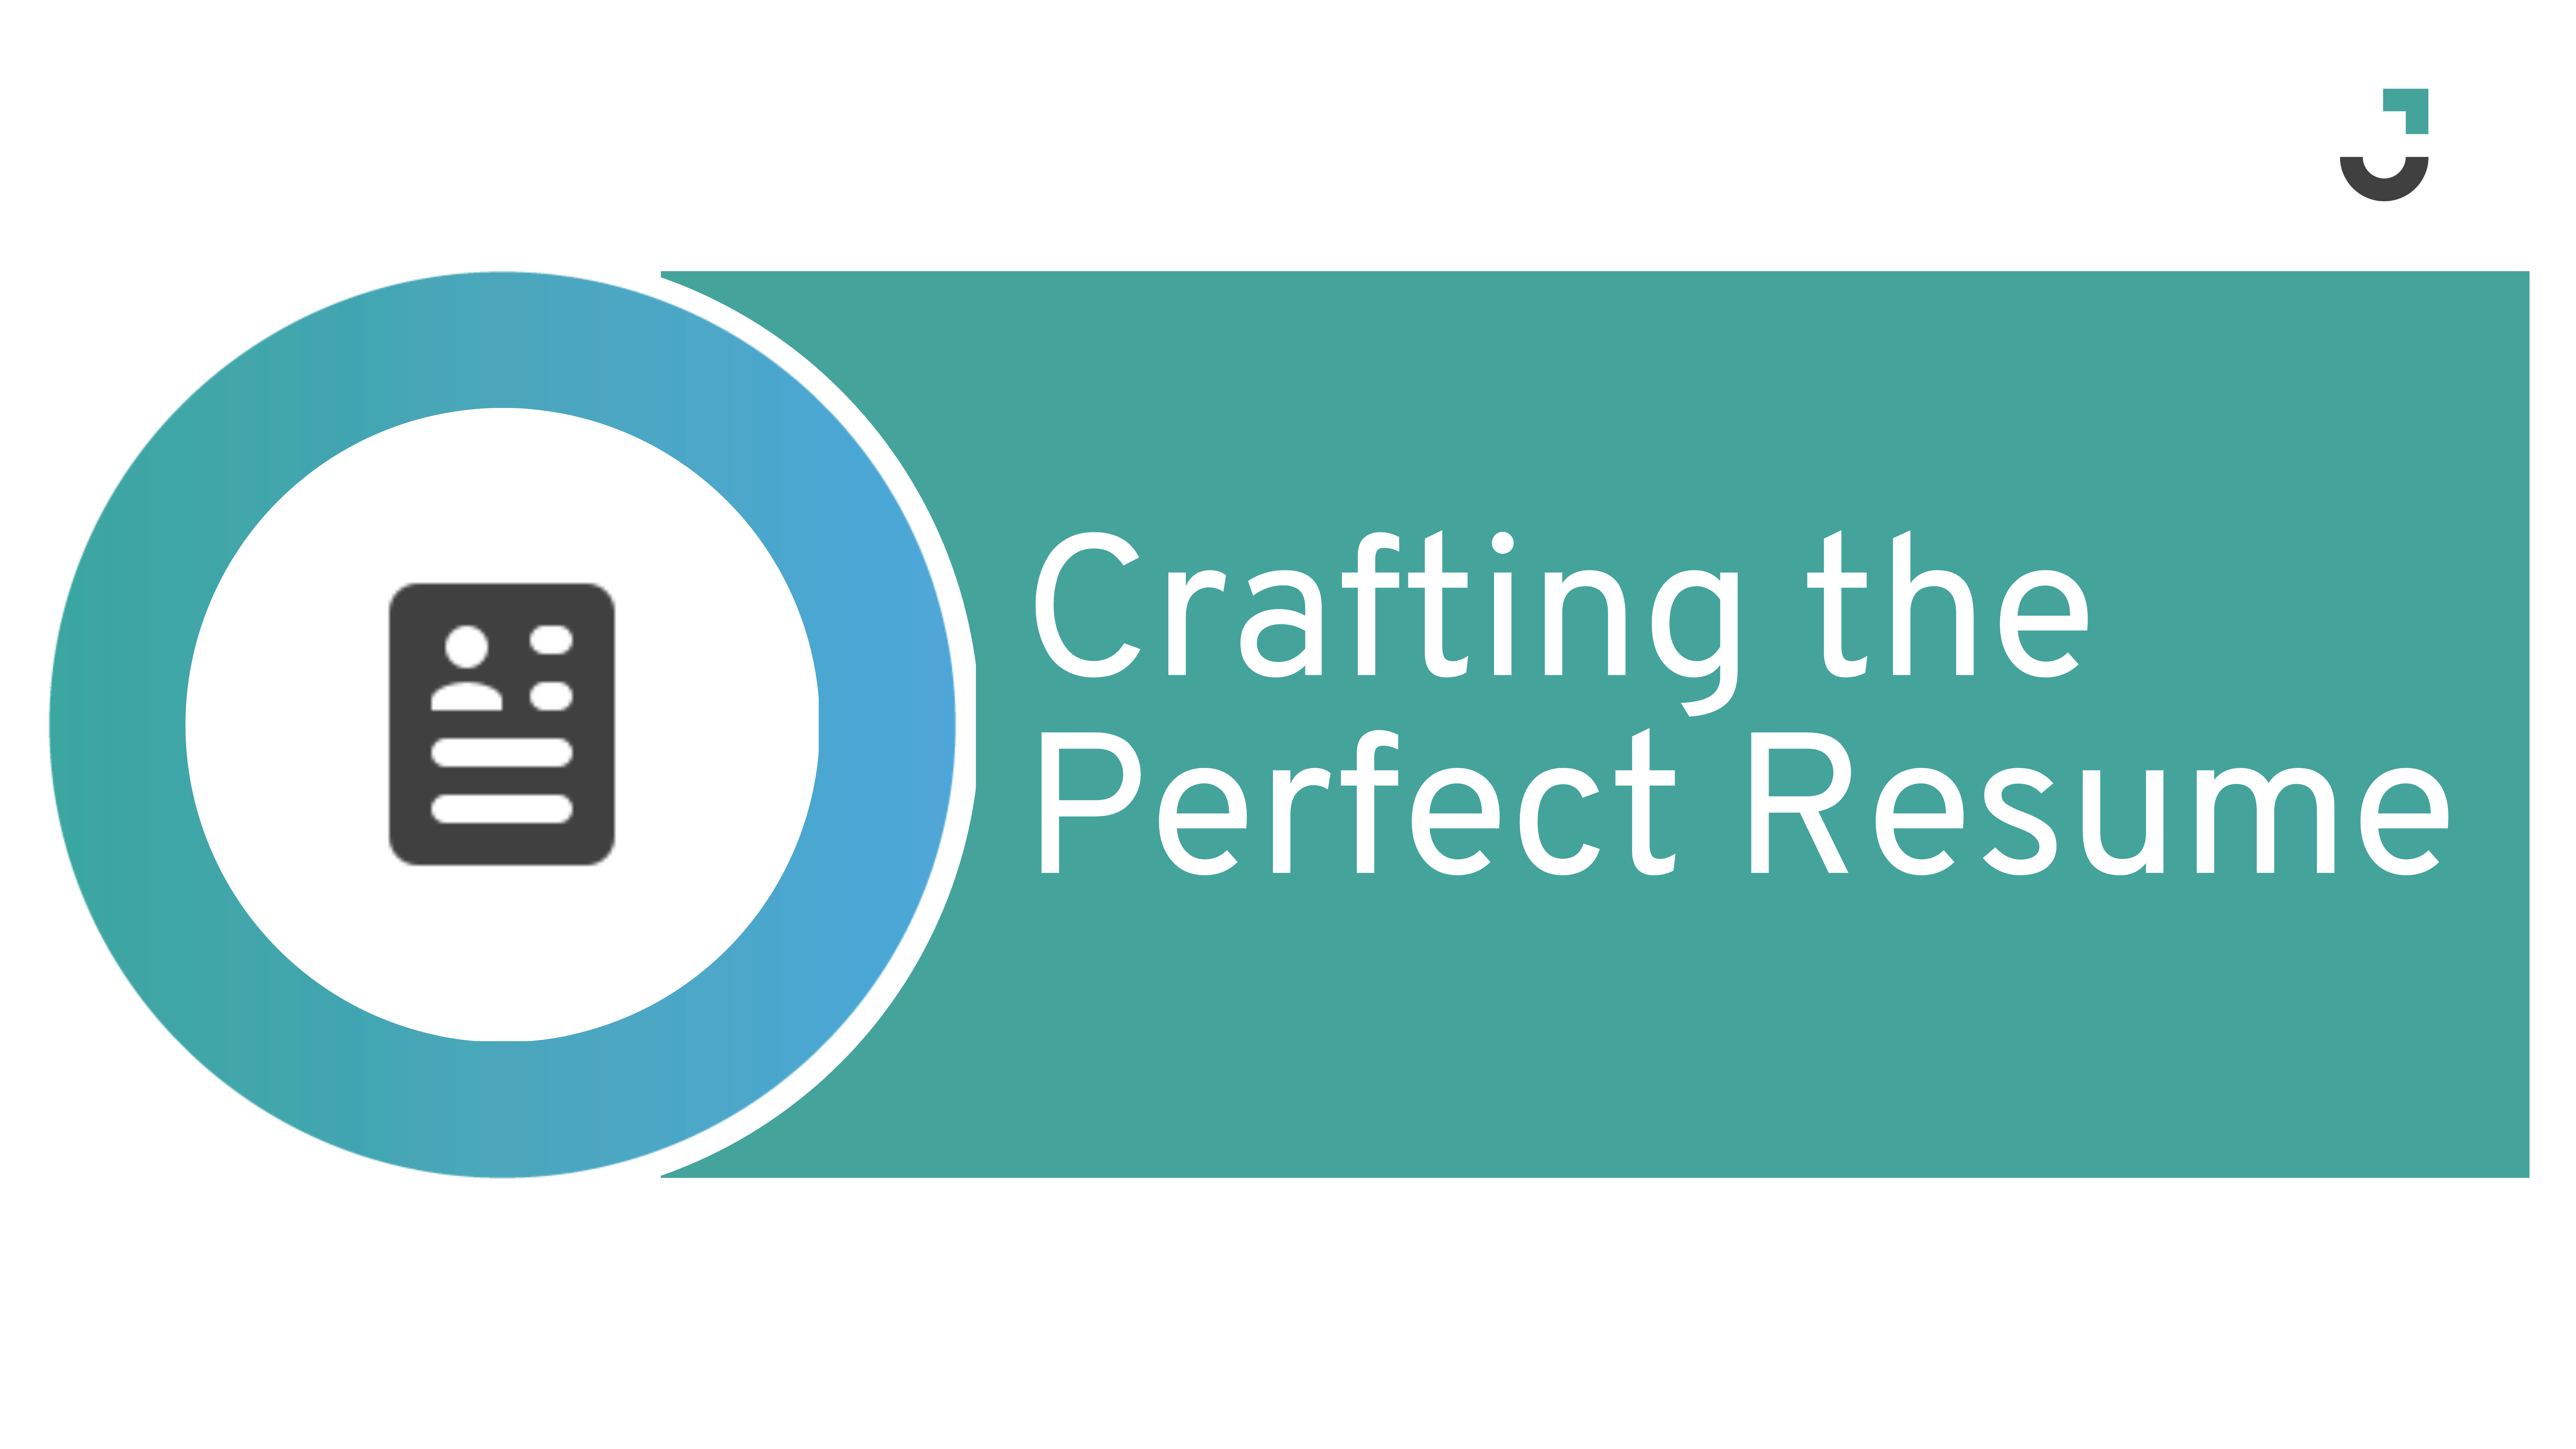 Crafting the Perfect Resume